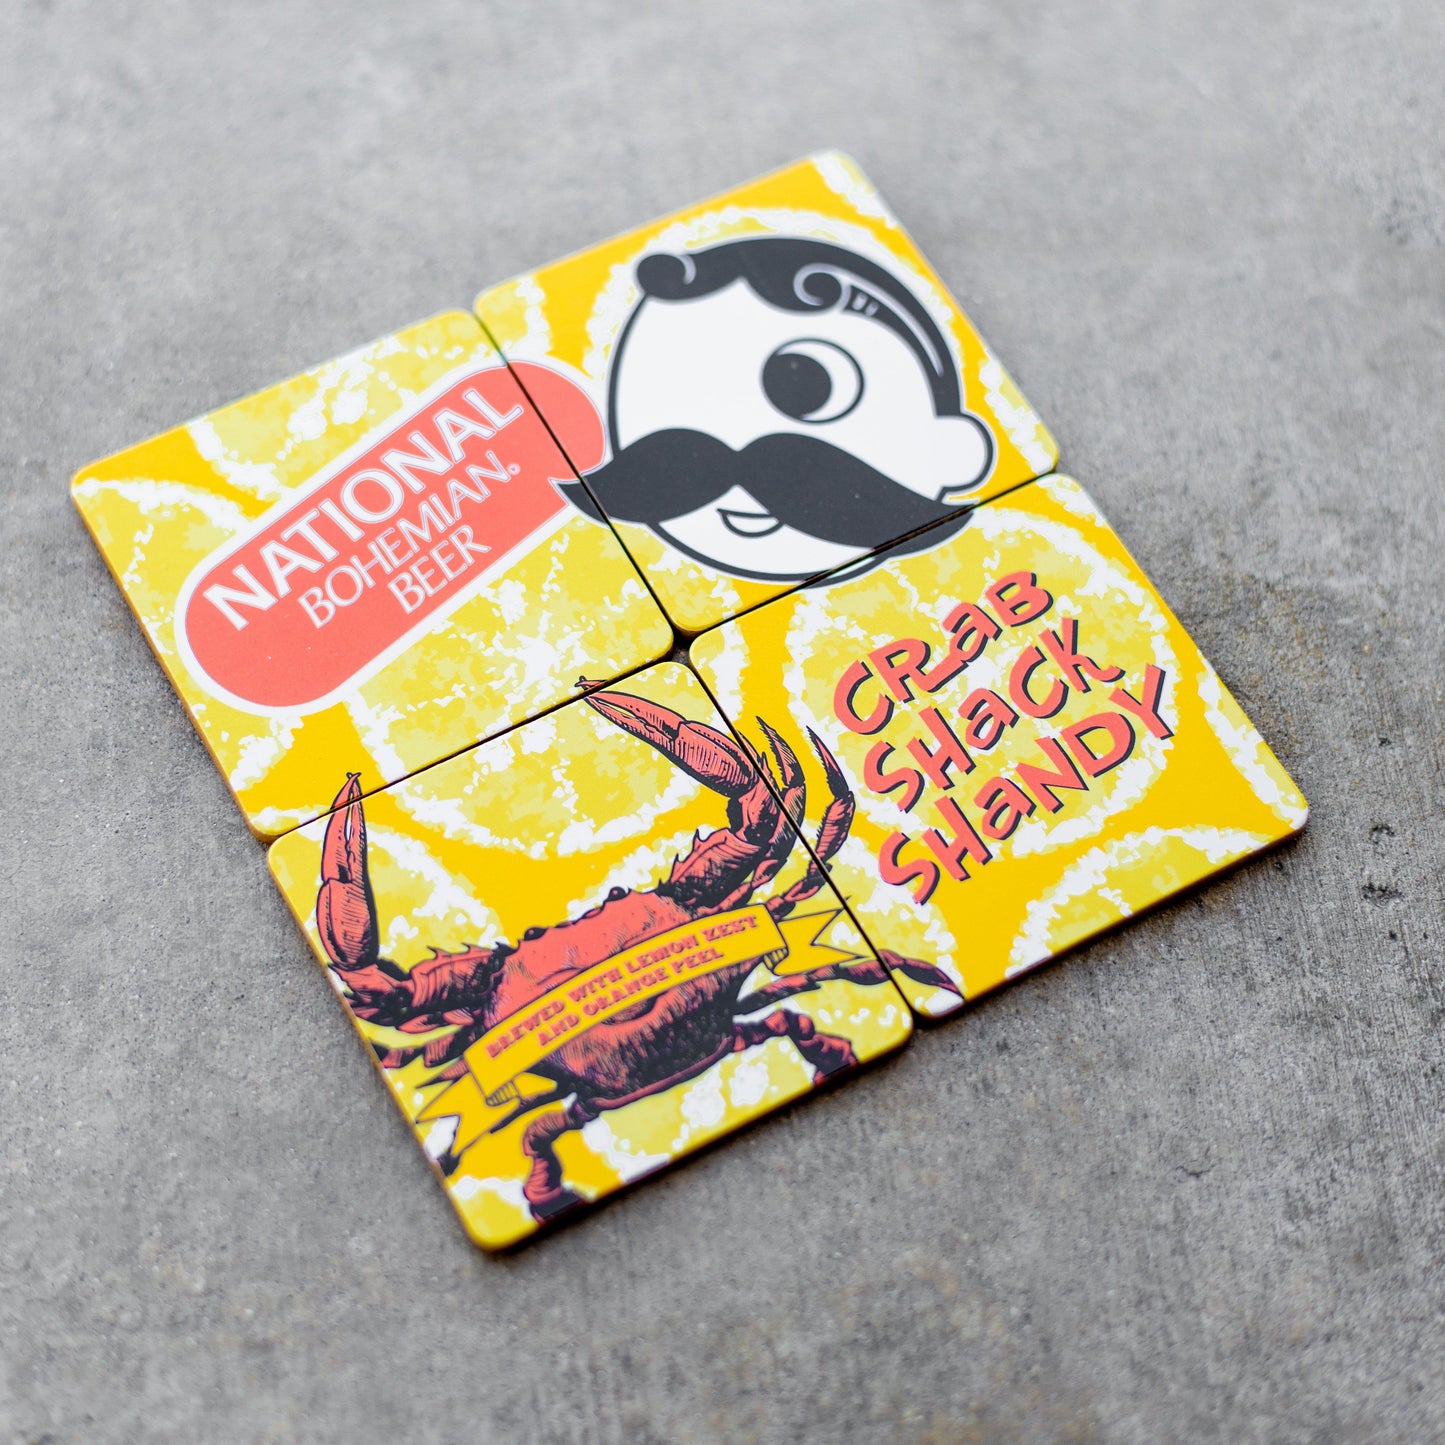 Crab Shack Shandy - National Bohemian (Yellow) / 4-Piece Cork Coaster Set - Route One Apparel